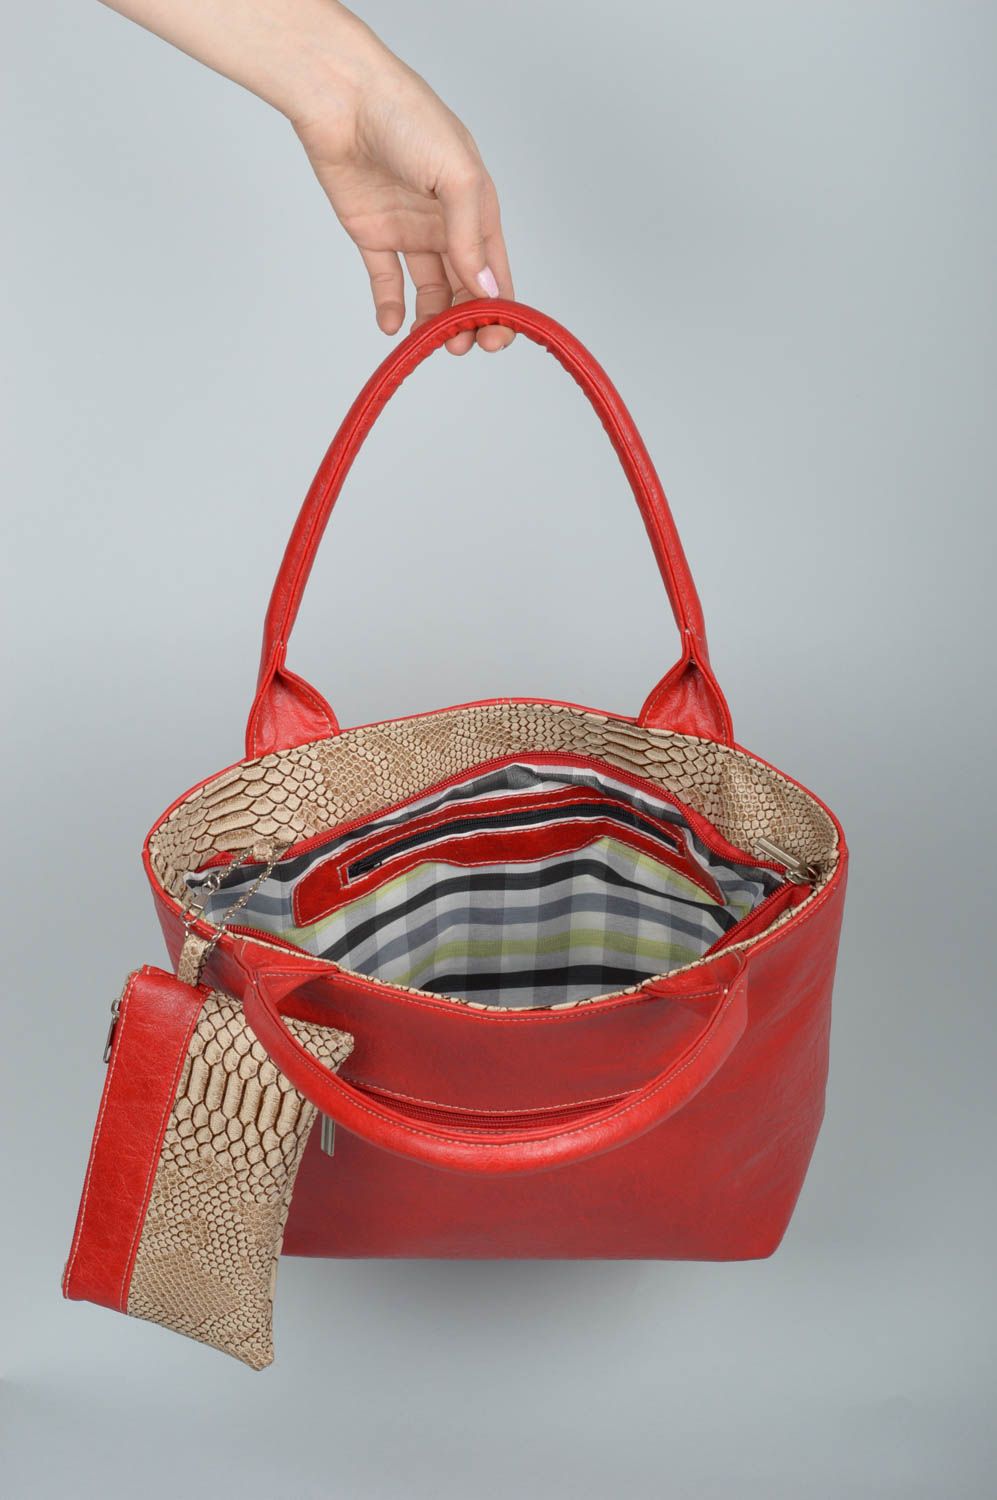 Handmade leatherette bag with purse red bag pretty bag unusual bag great gift photo 3